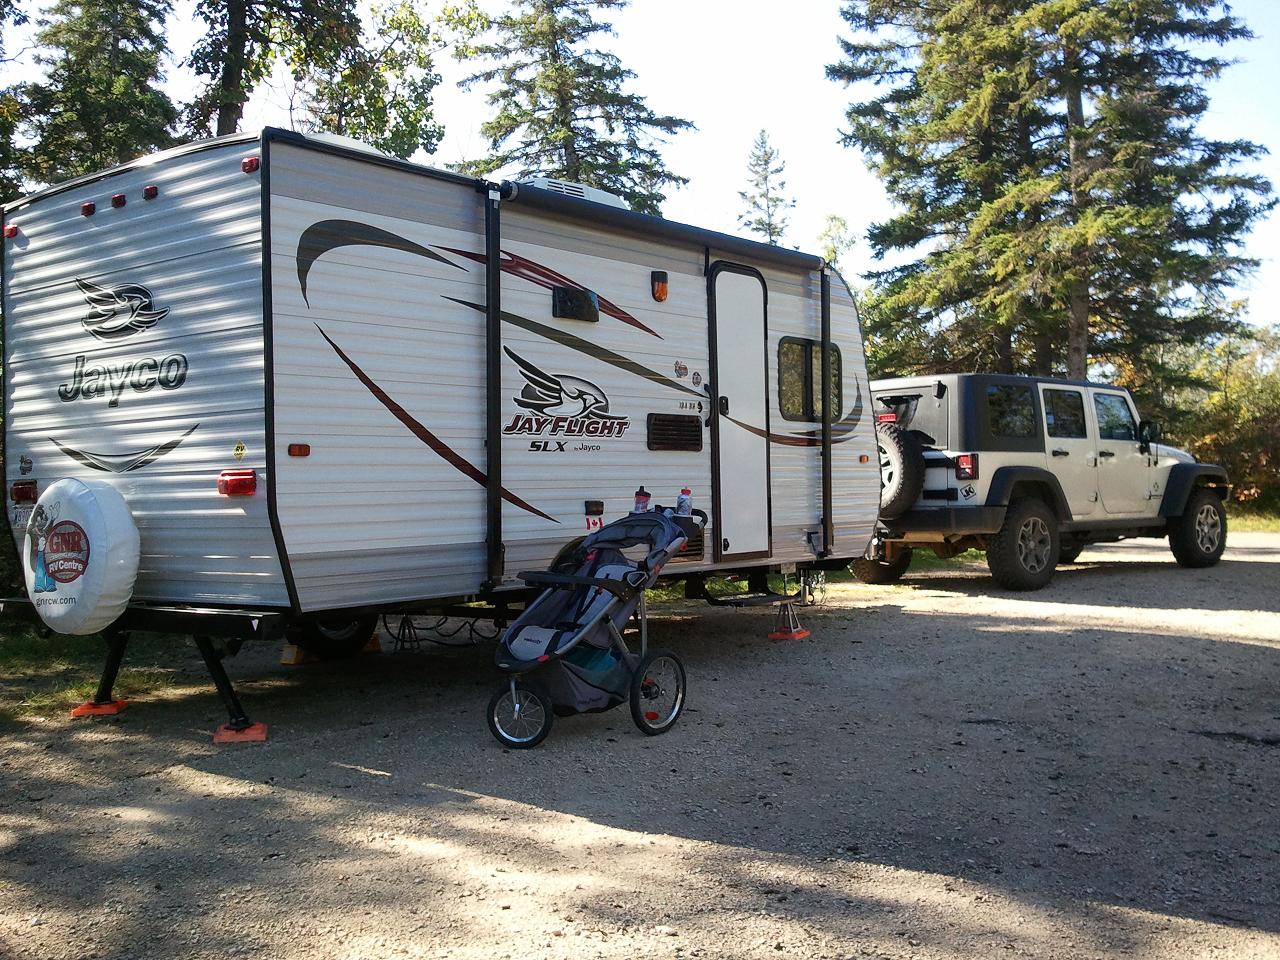  Open Roads Forum: Which size RV to tow Jeep Wrangler on trailer?